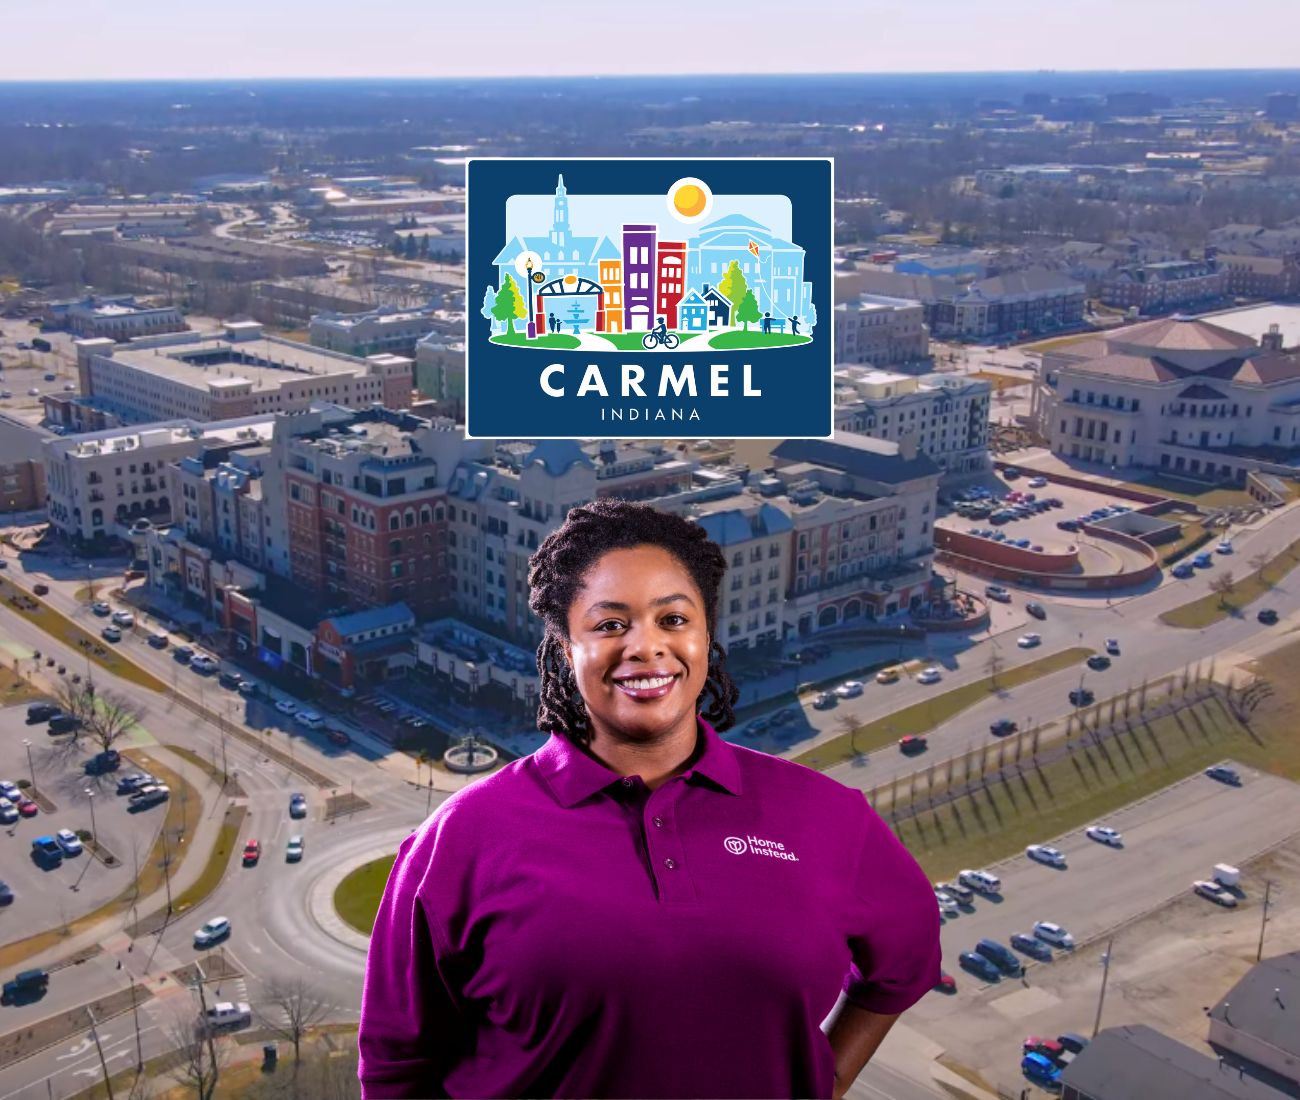 Home Instead caregiver with Carmel, Indiana in the background